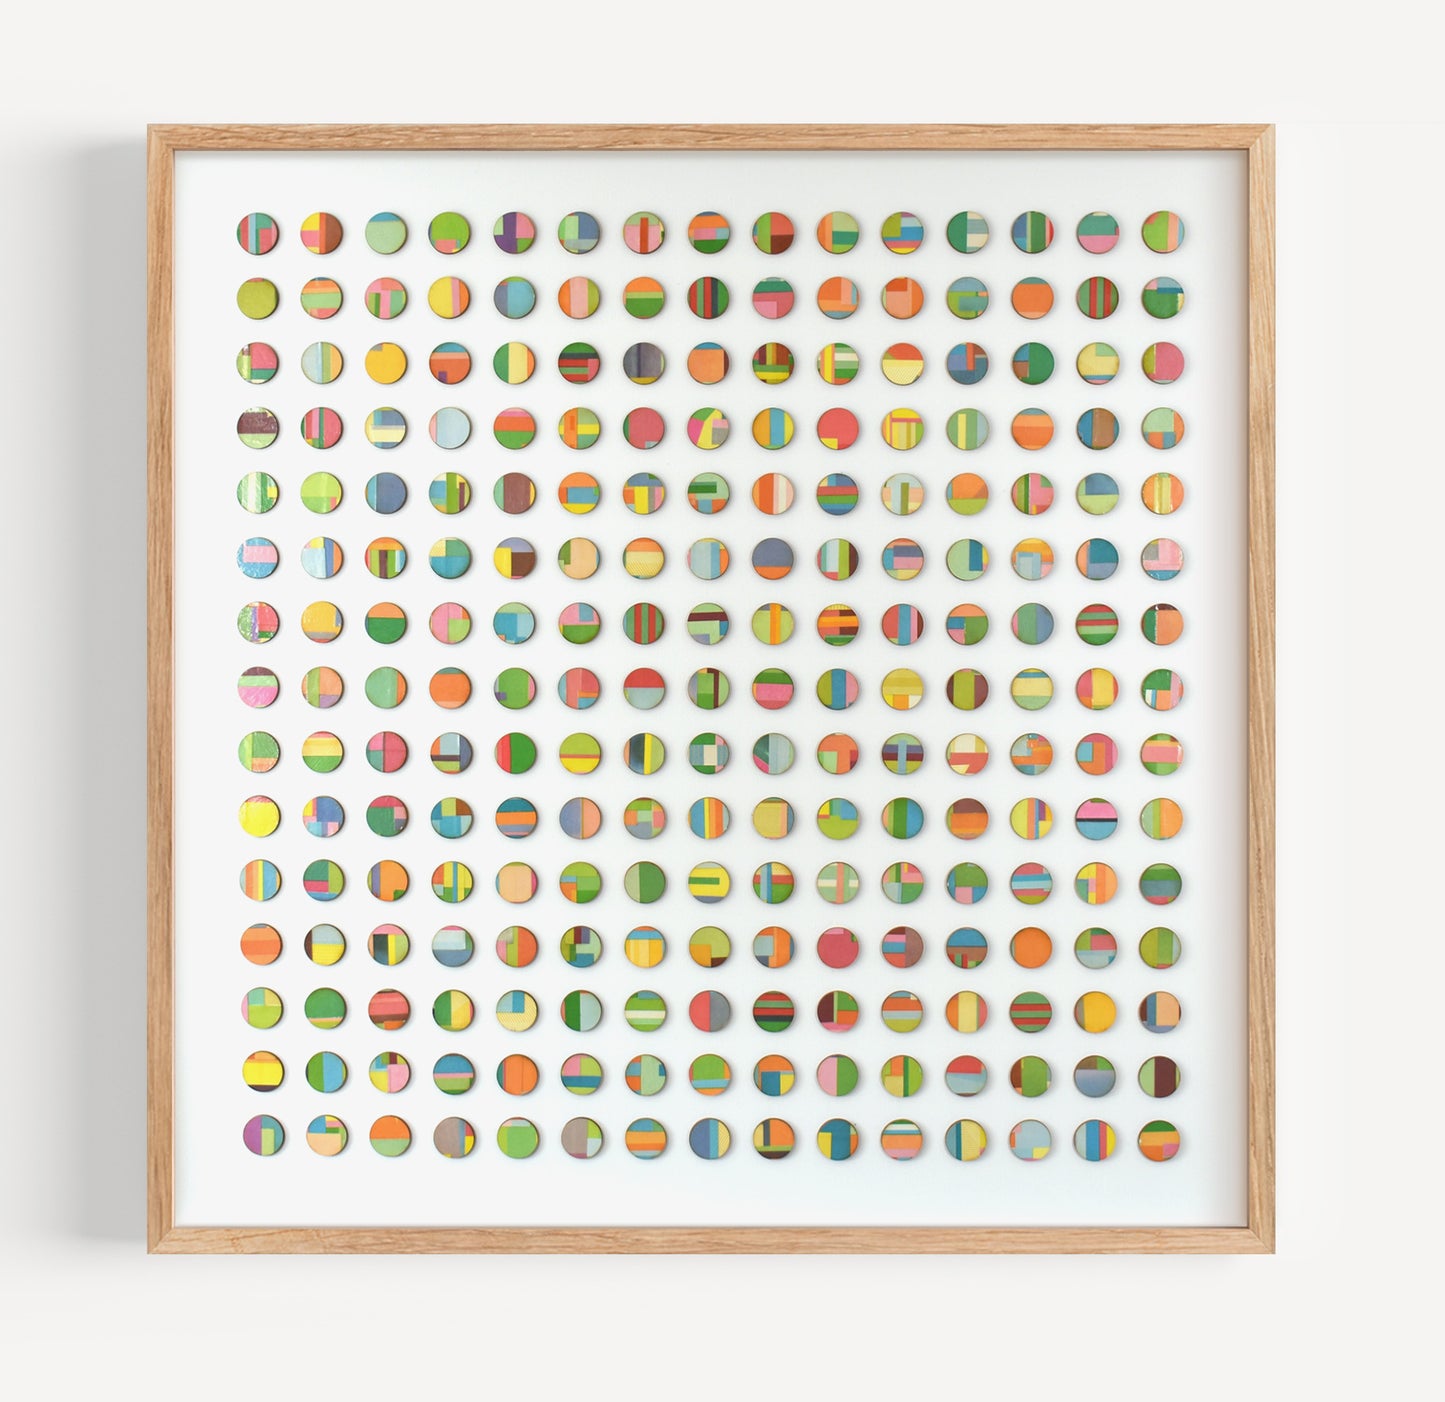 Two Hundred and Twenty Five Vintage Cookery Book Dots Collage